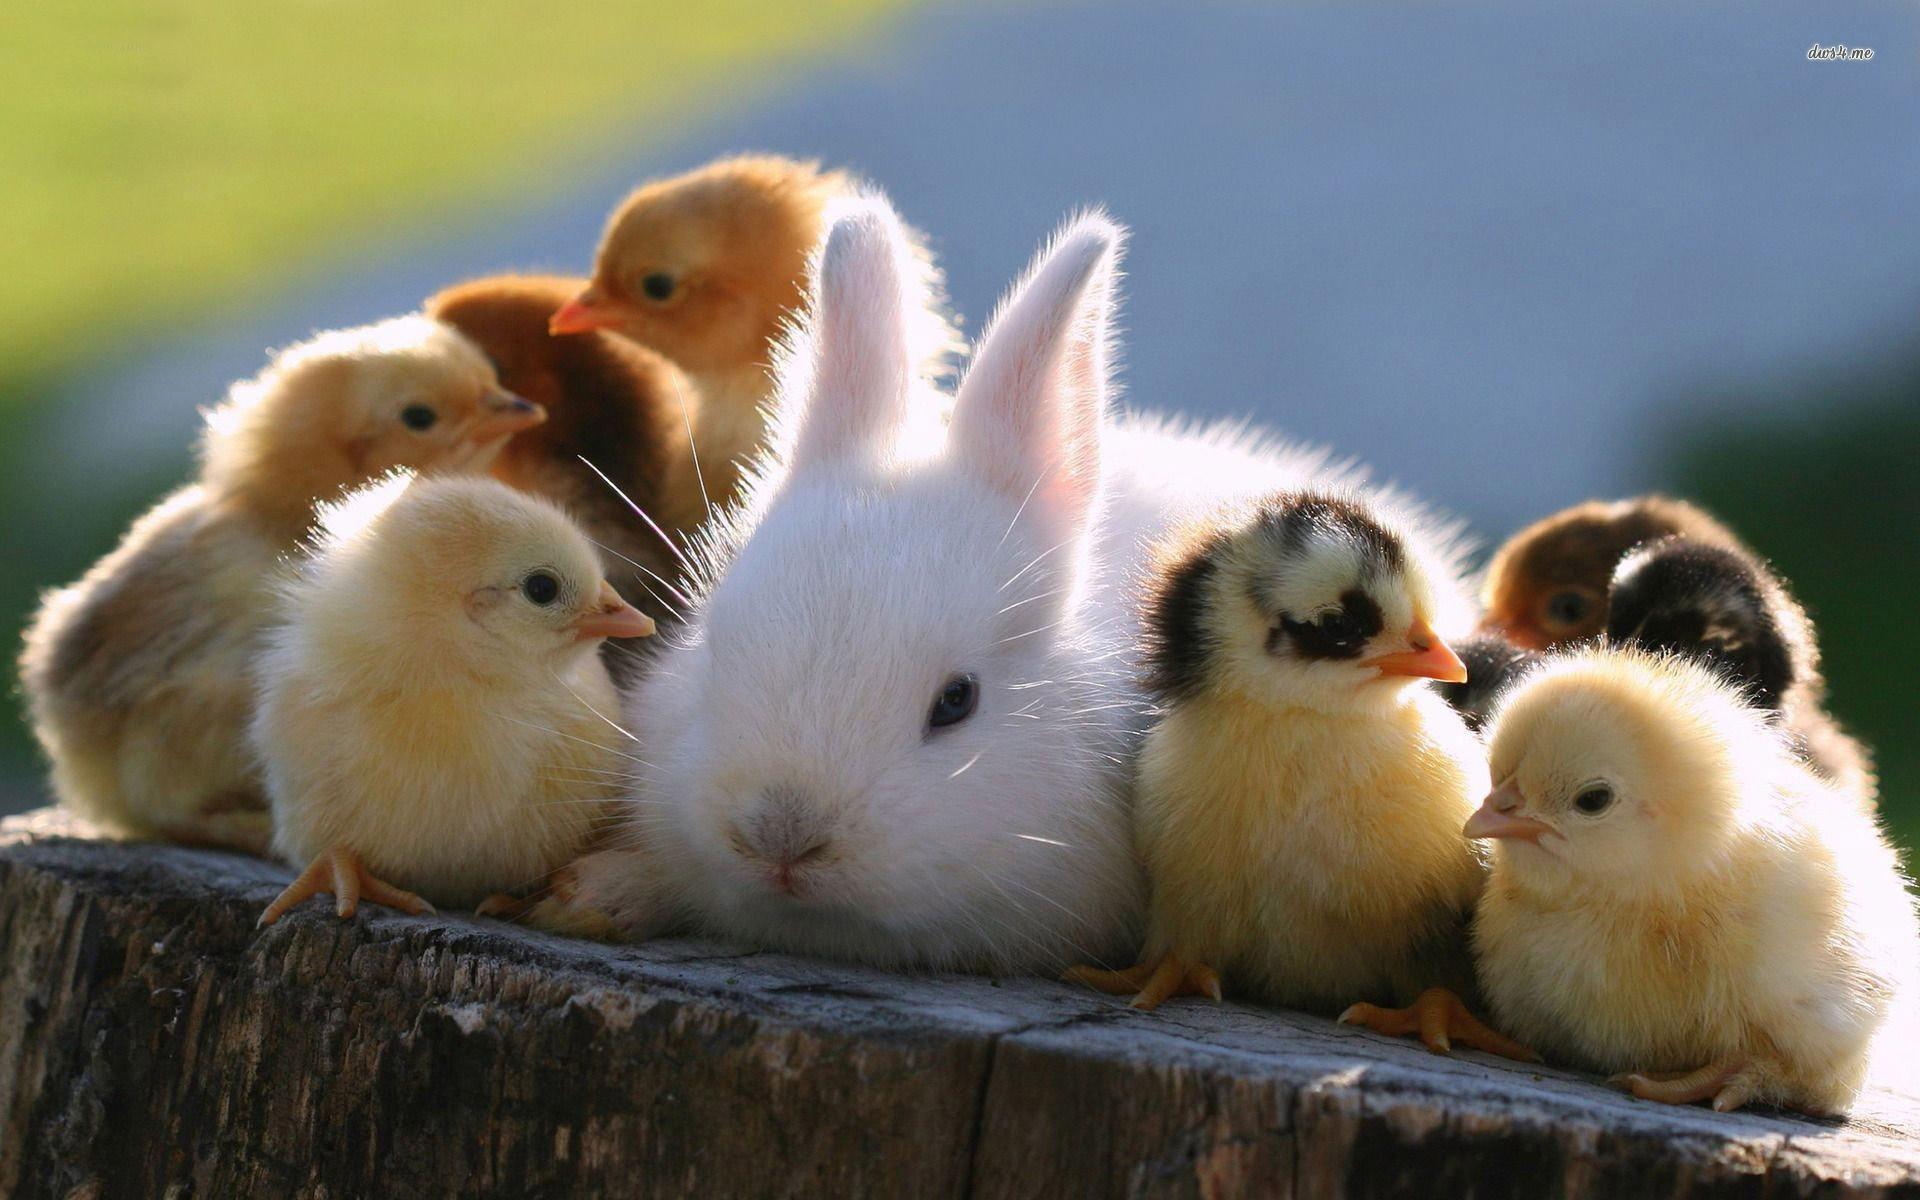 Cute rabbit and chicks wallpaper. PC